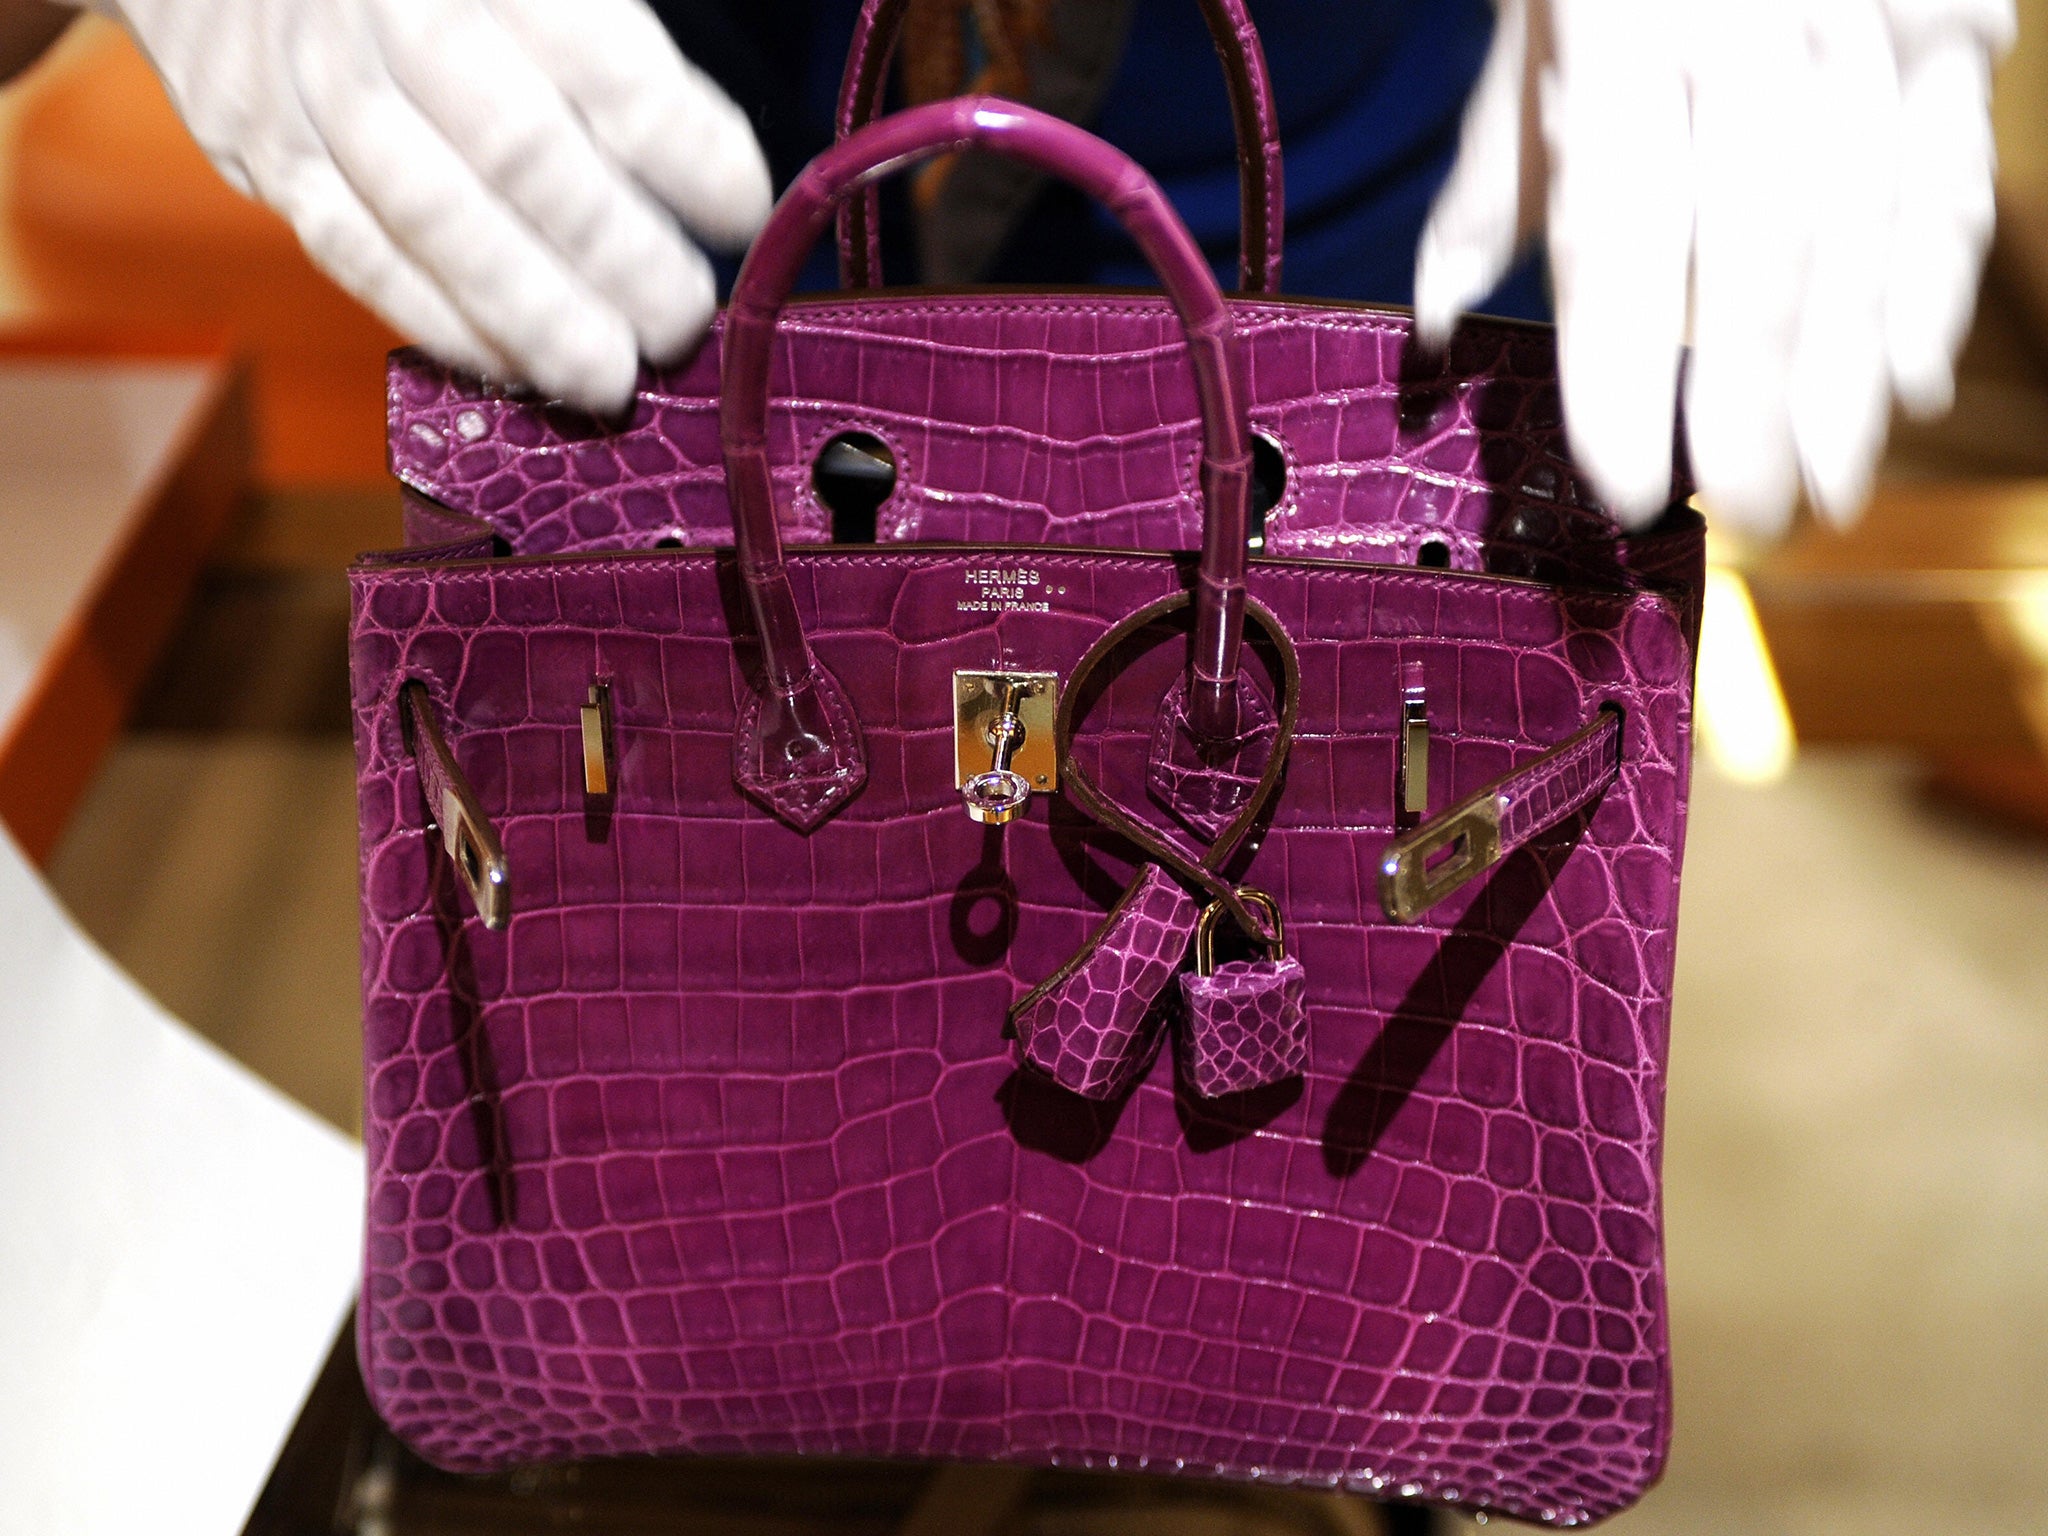 A Hermes crocodile skin bag, an example of fashion’s current love of exotic skins